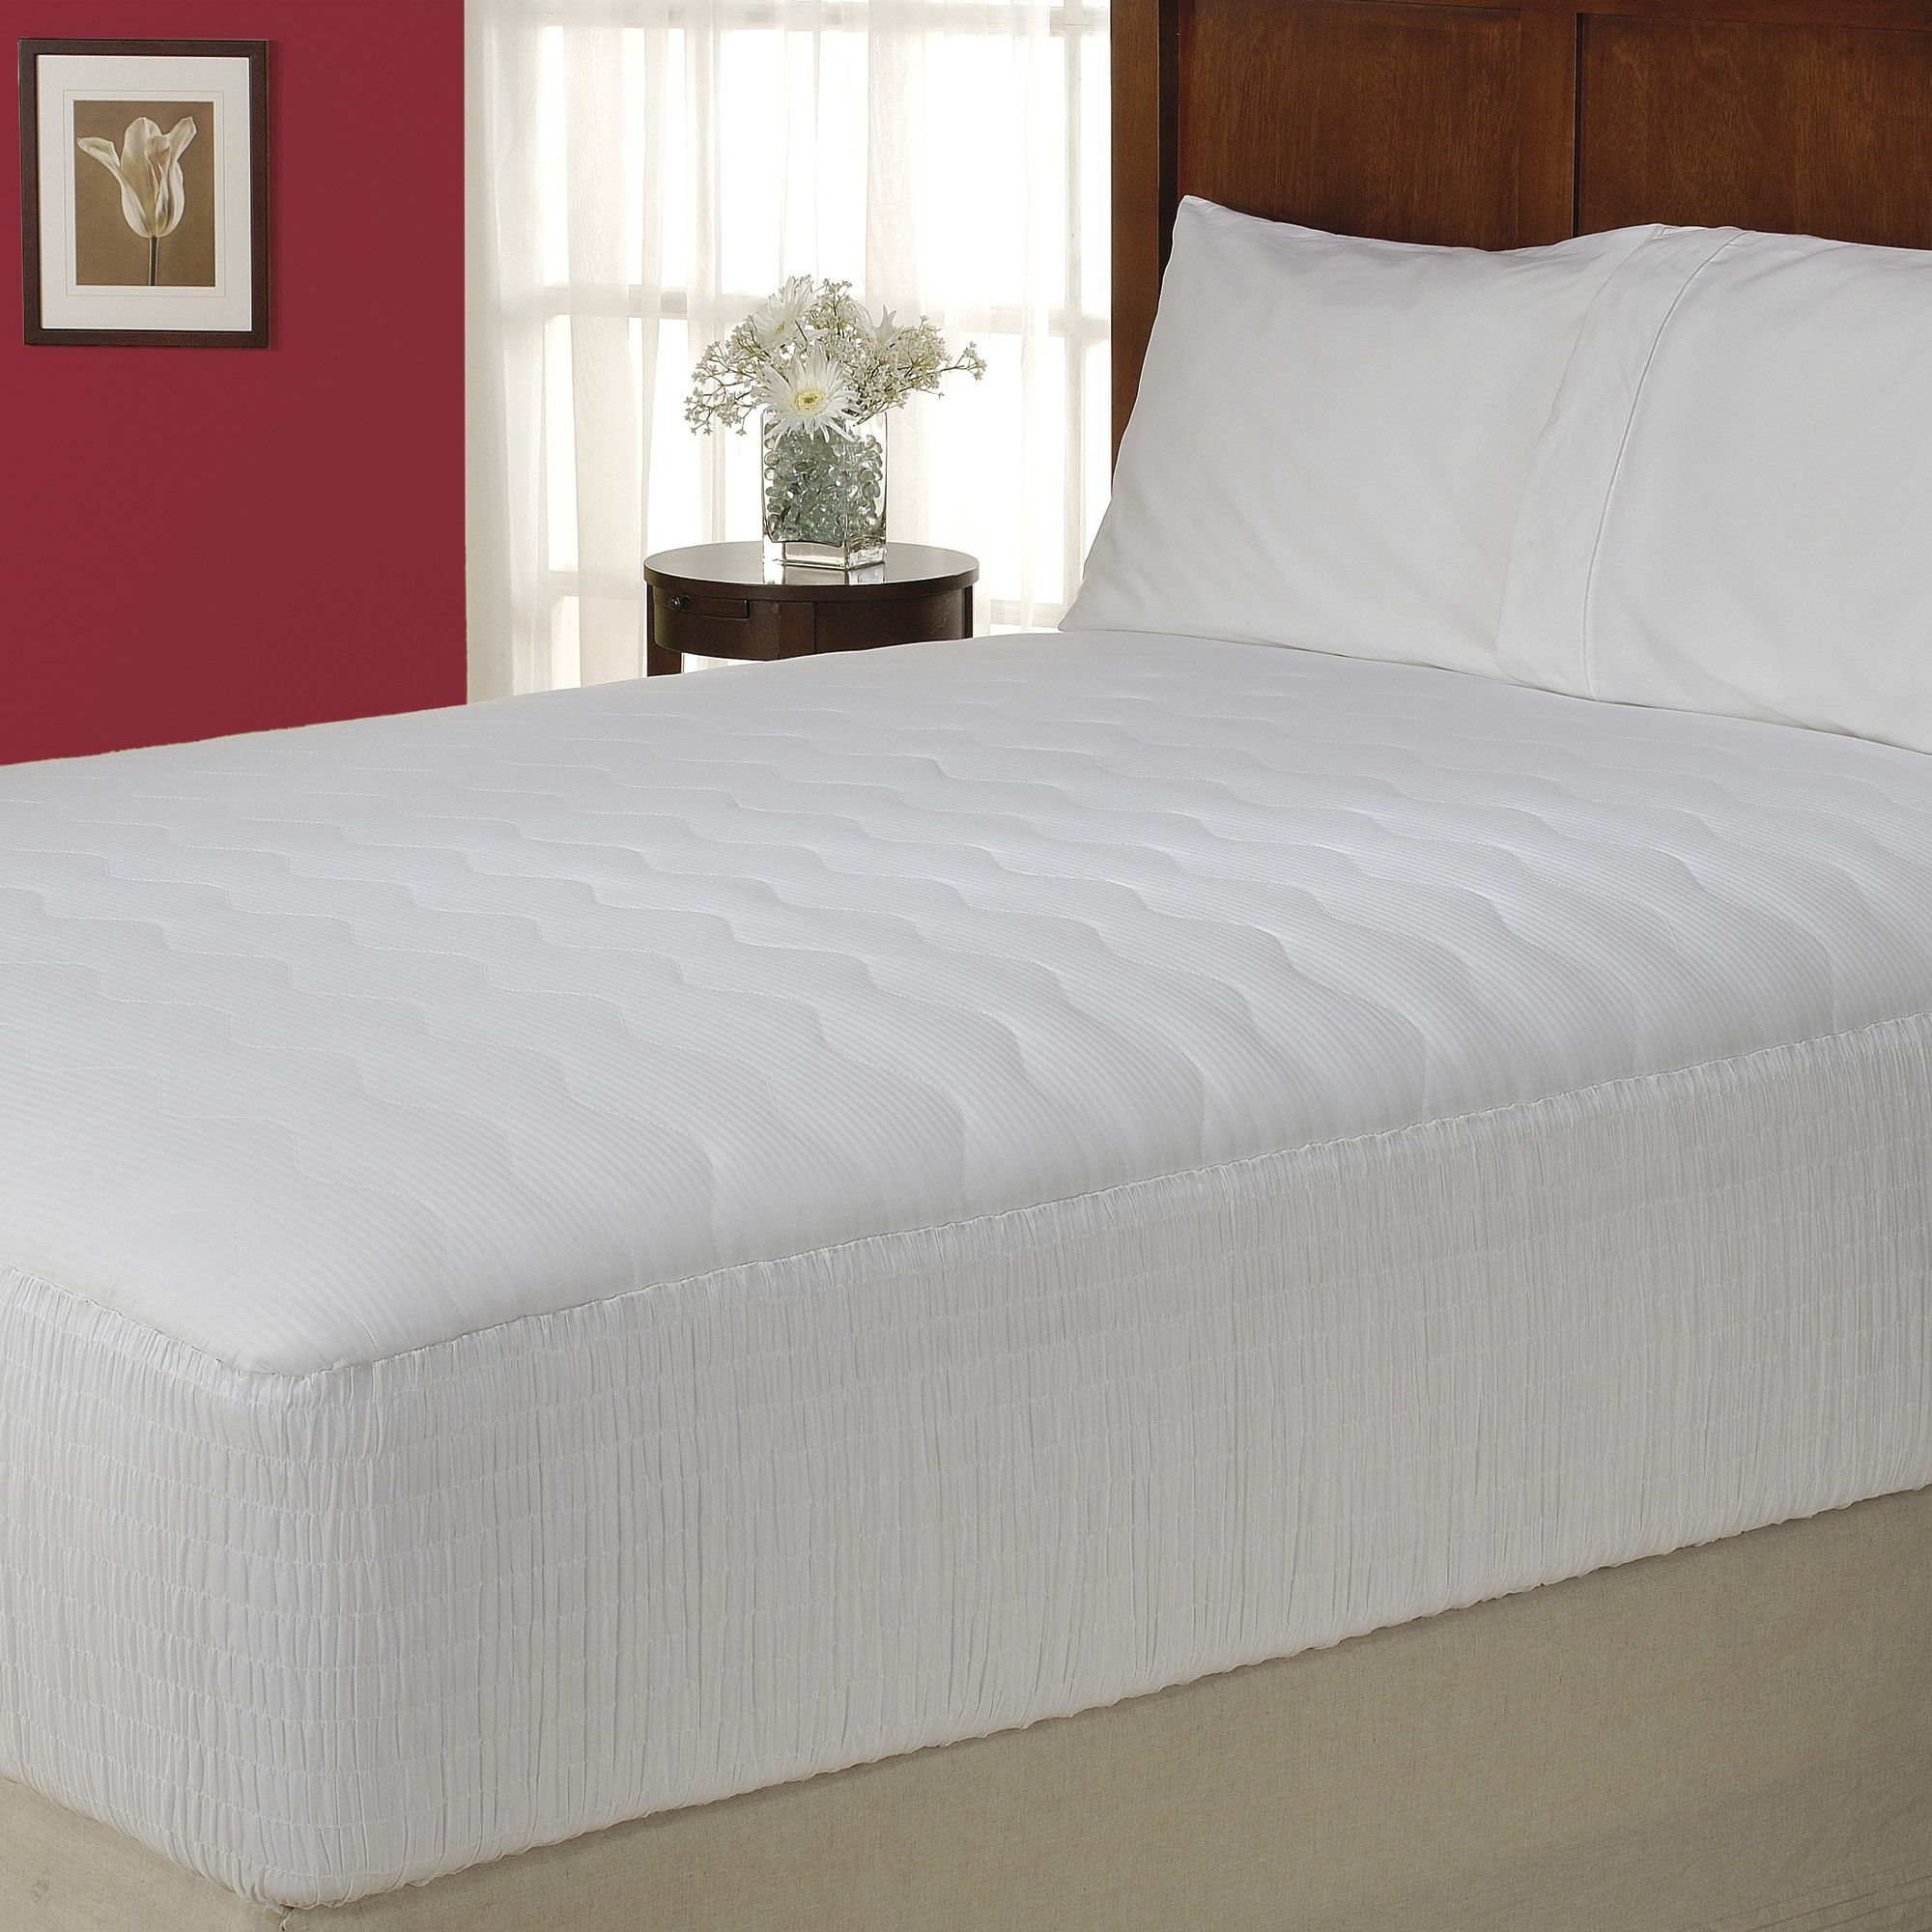 Cannon 300 Thread Count Egyptian Mattress Pad